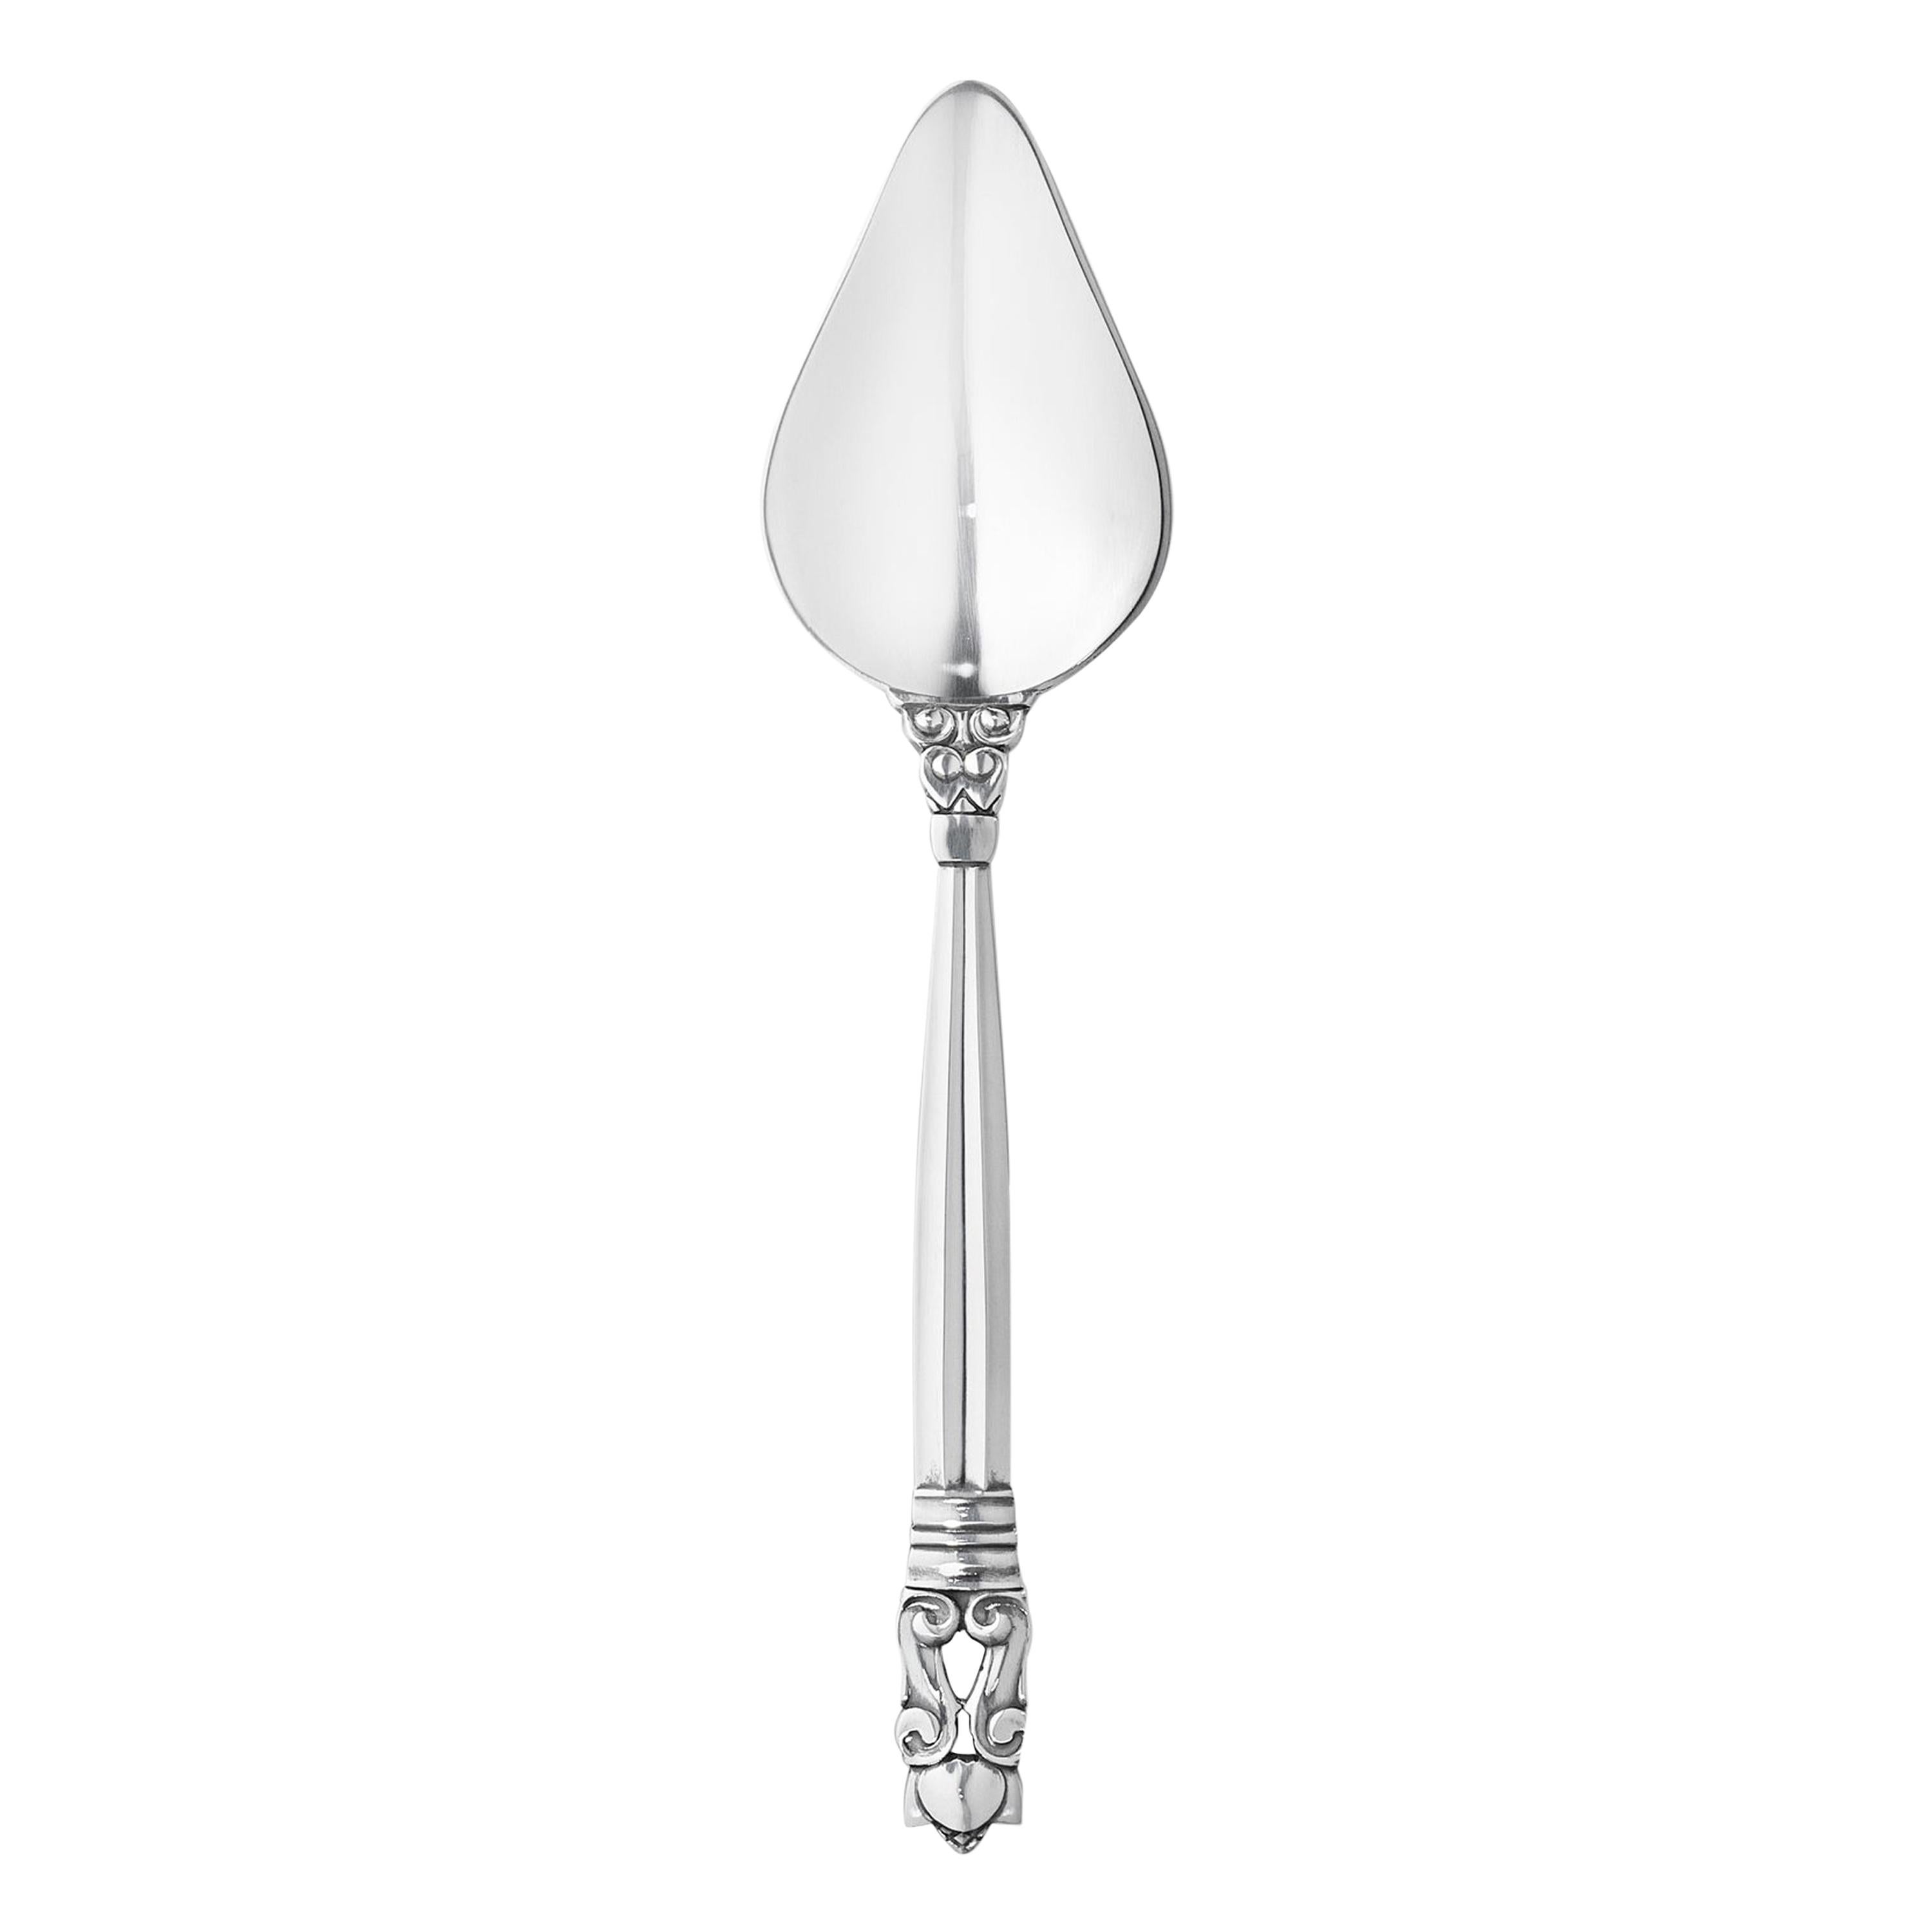 Georg Jensen Handcrafted Sterling Silver Acorn Grapefruit Spoon by Johan Rohde For Sale